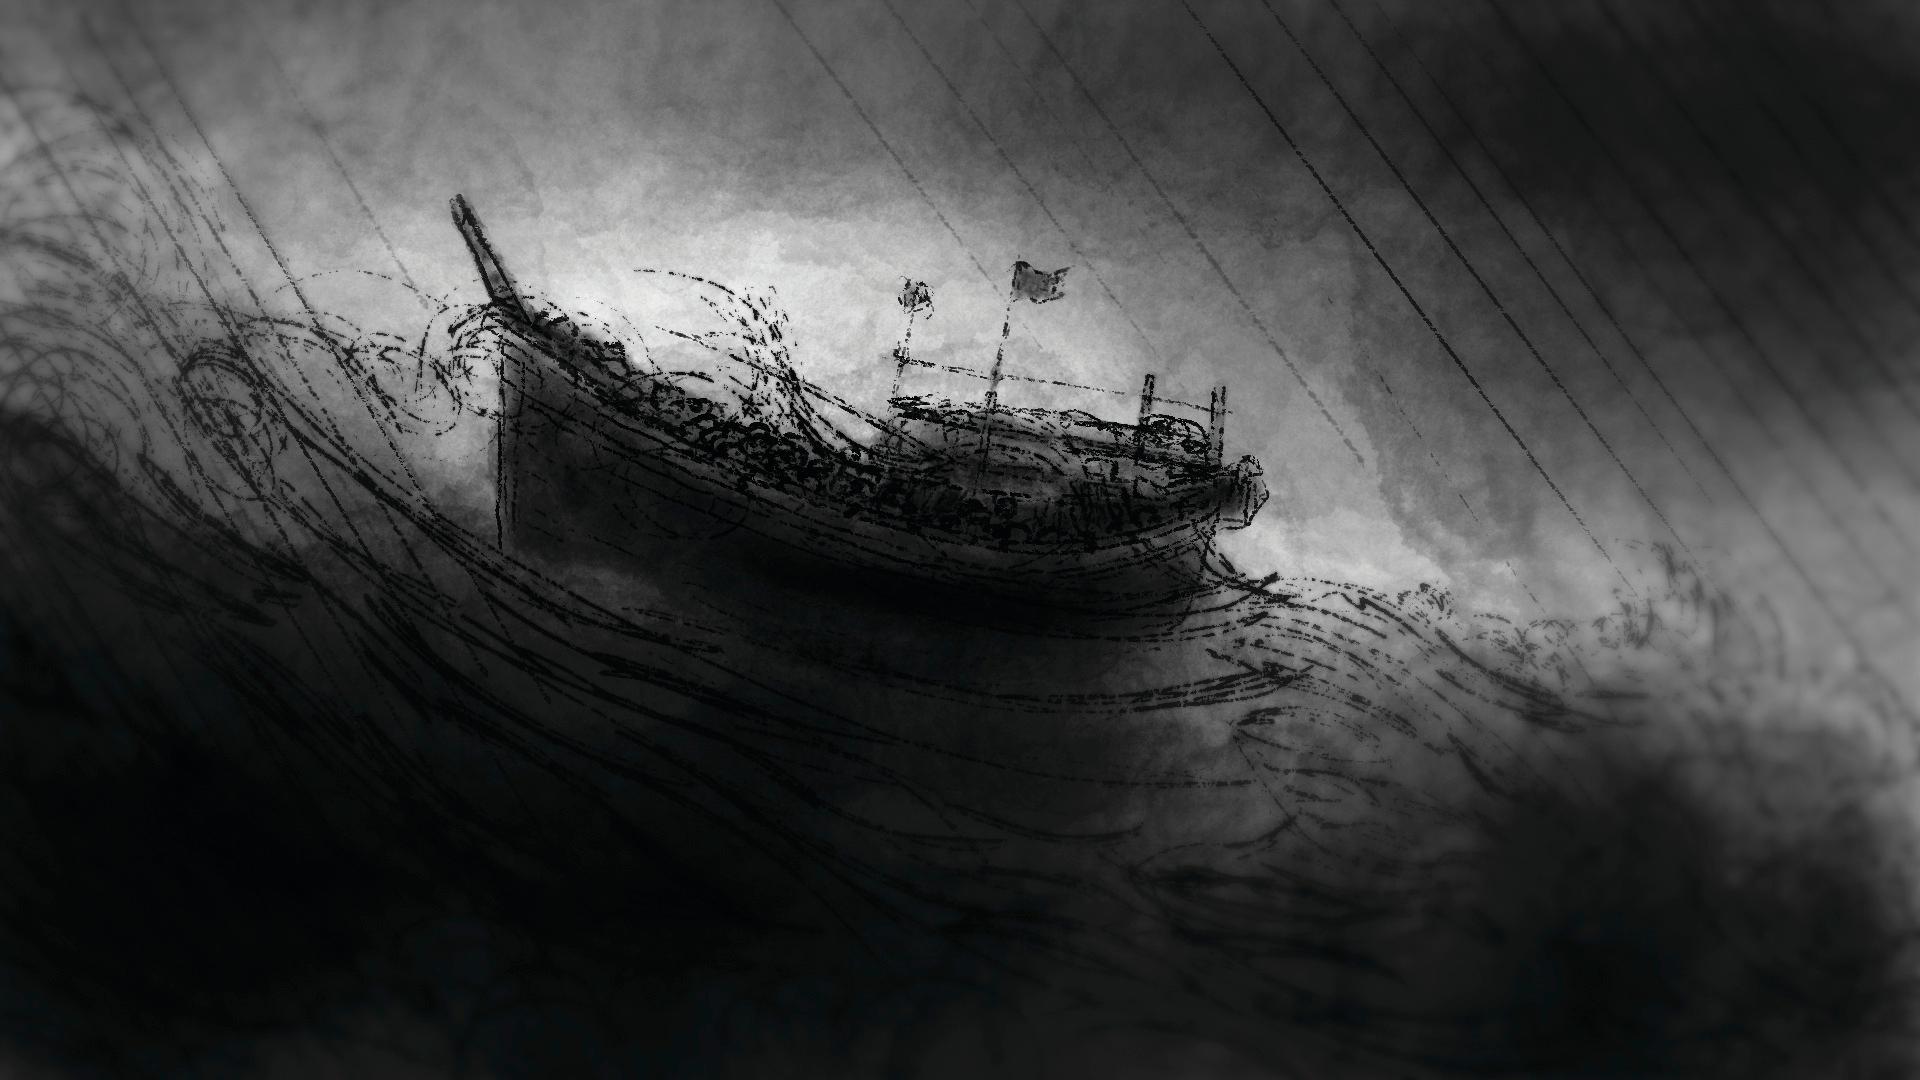 Black and white illustration of a boat on rocky waters